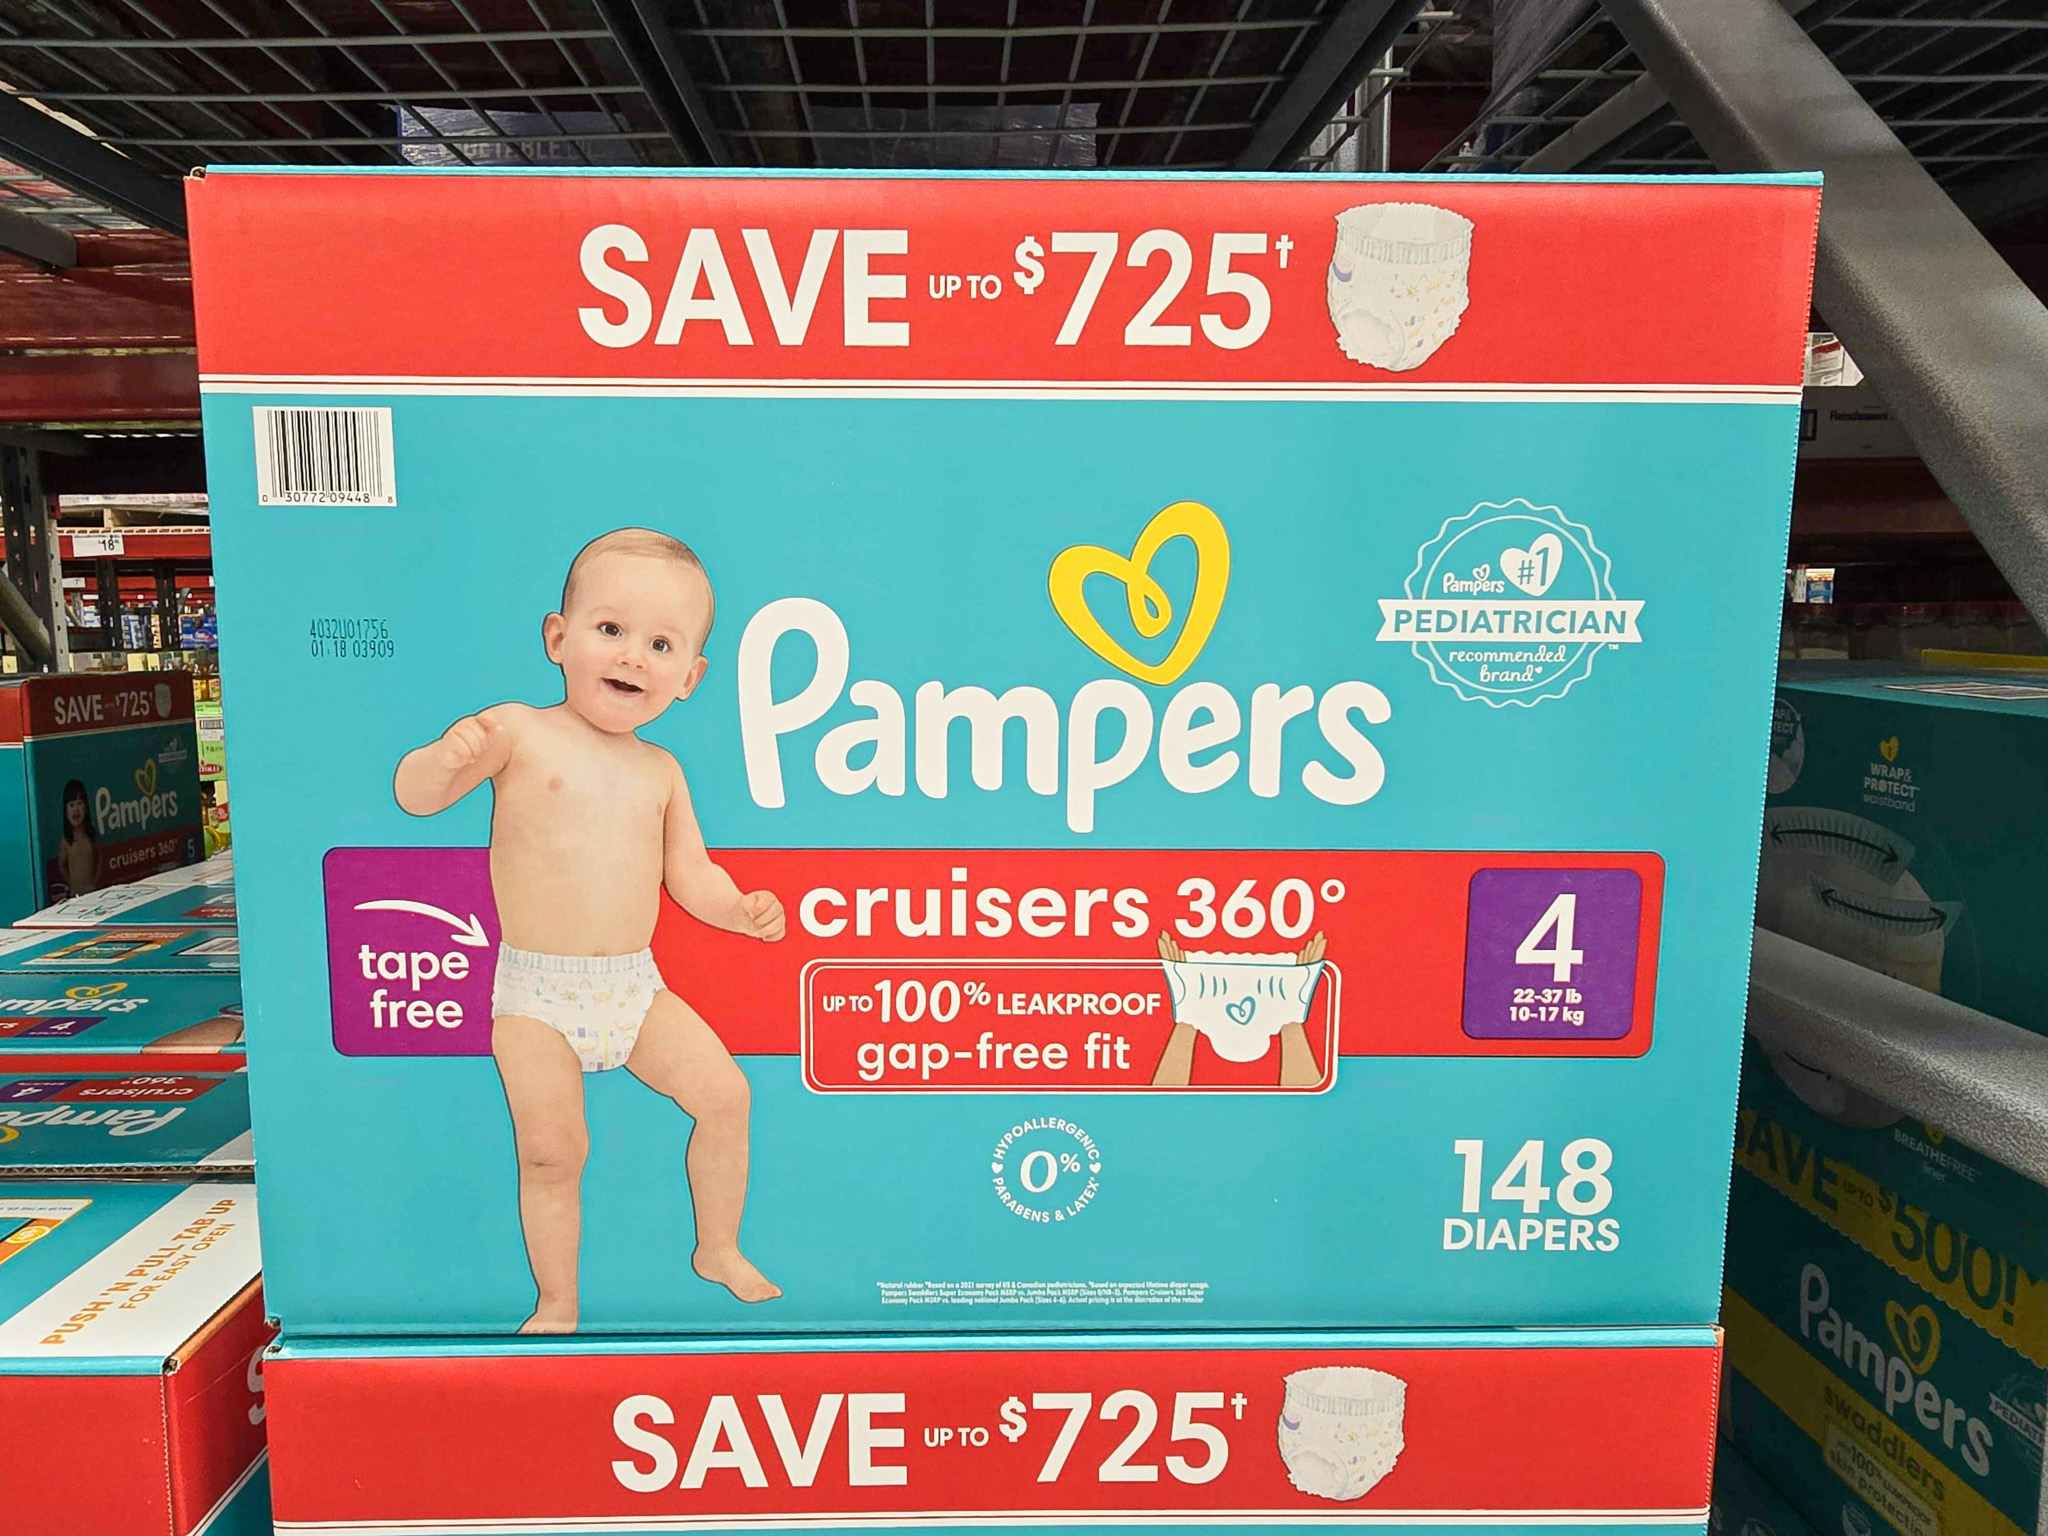 huge box of pampers cruisers diapers